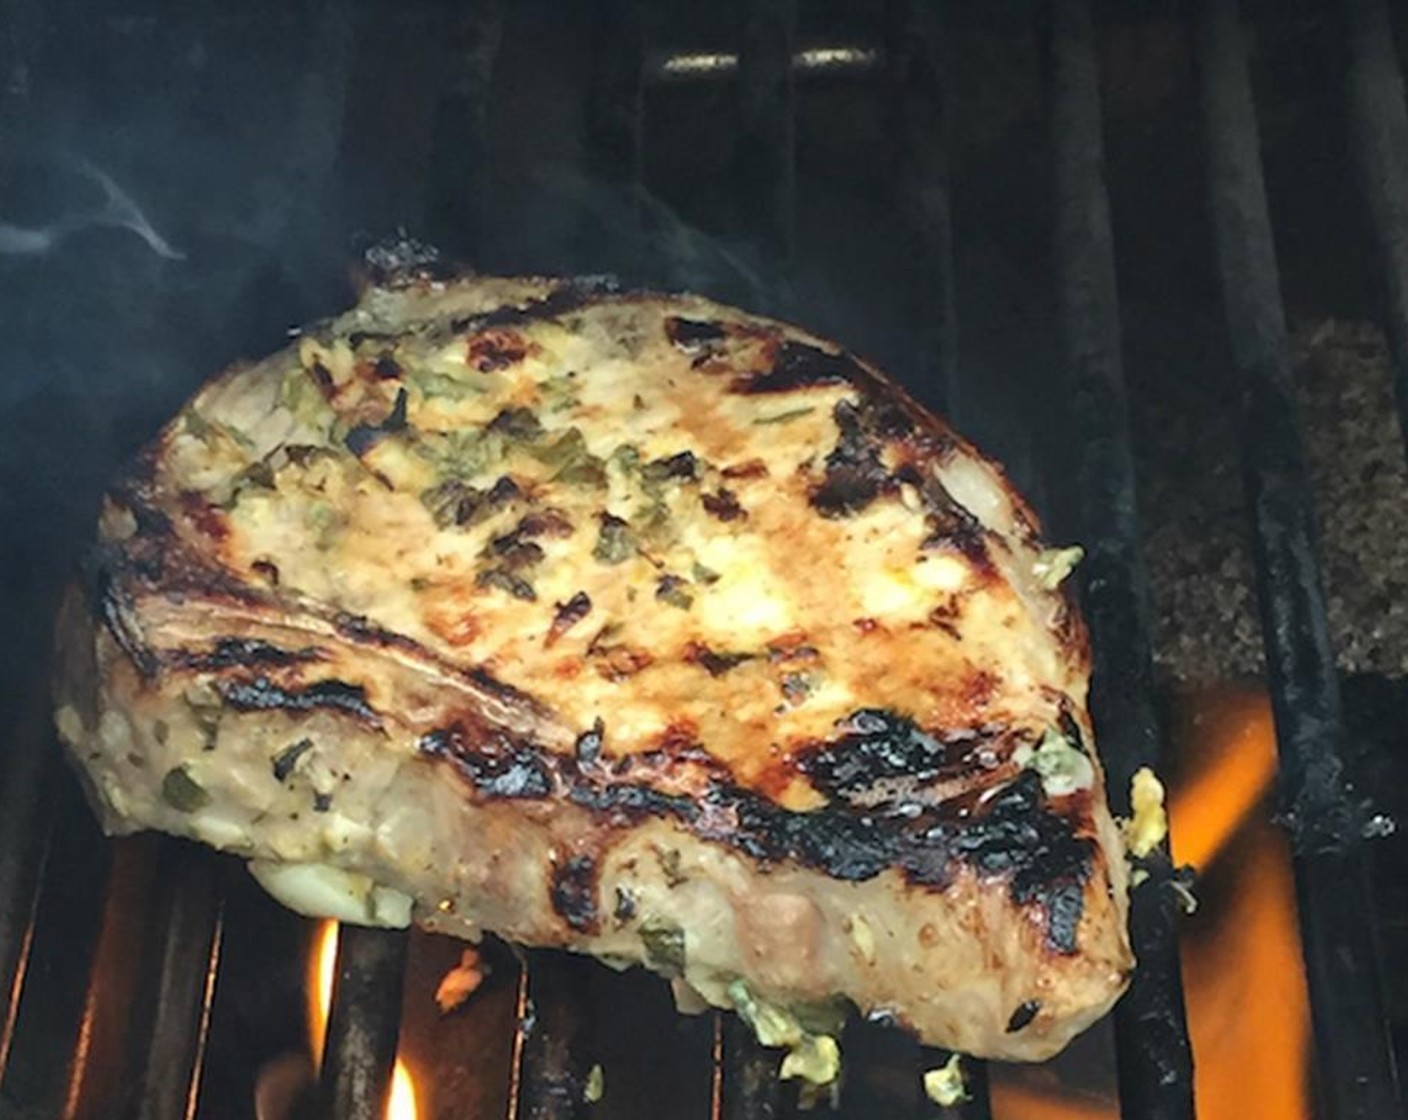 step 3 Prepare a grill for direct heat cooking. Grill the thick center cut pork chops over a high flame until done to your liking. About 6 minutes per side for medium, 8 to 9 minutes per side for well.